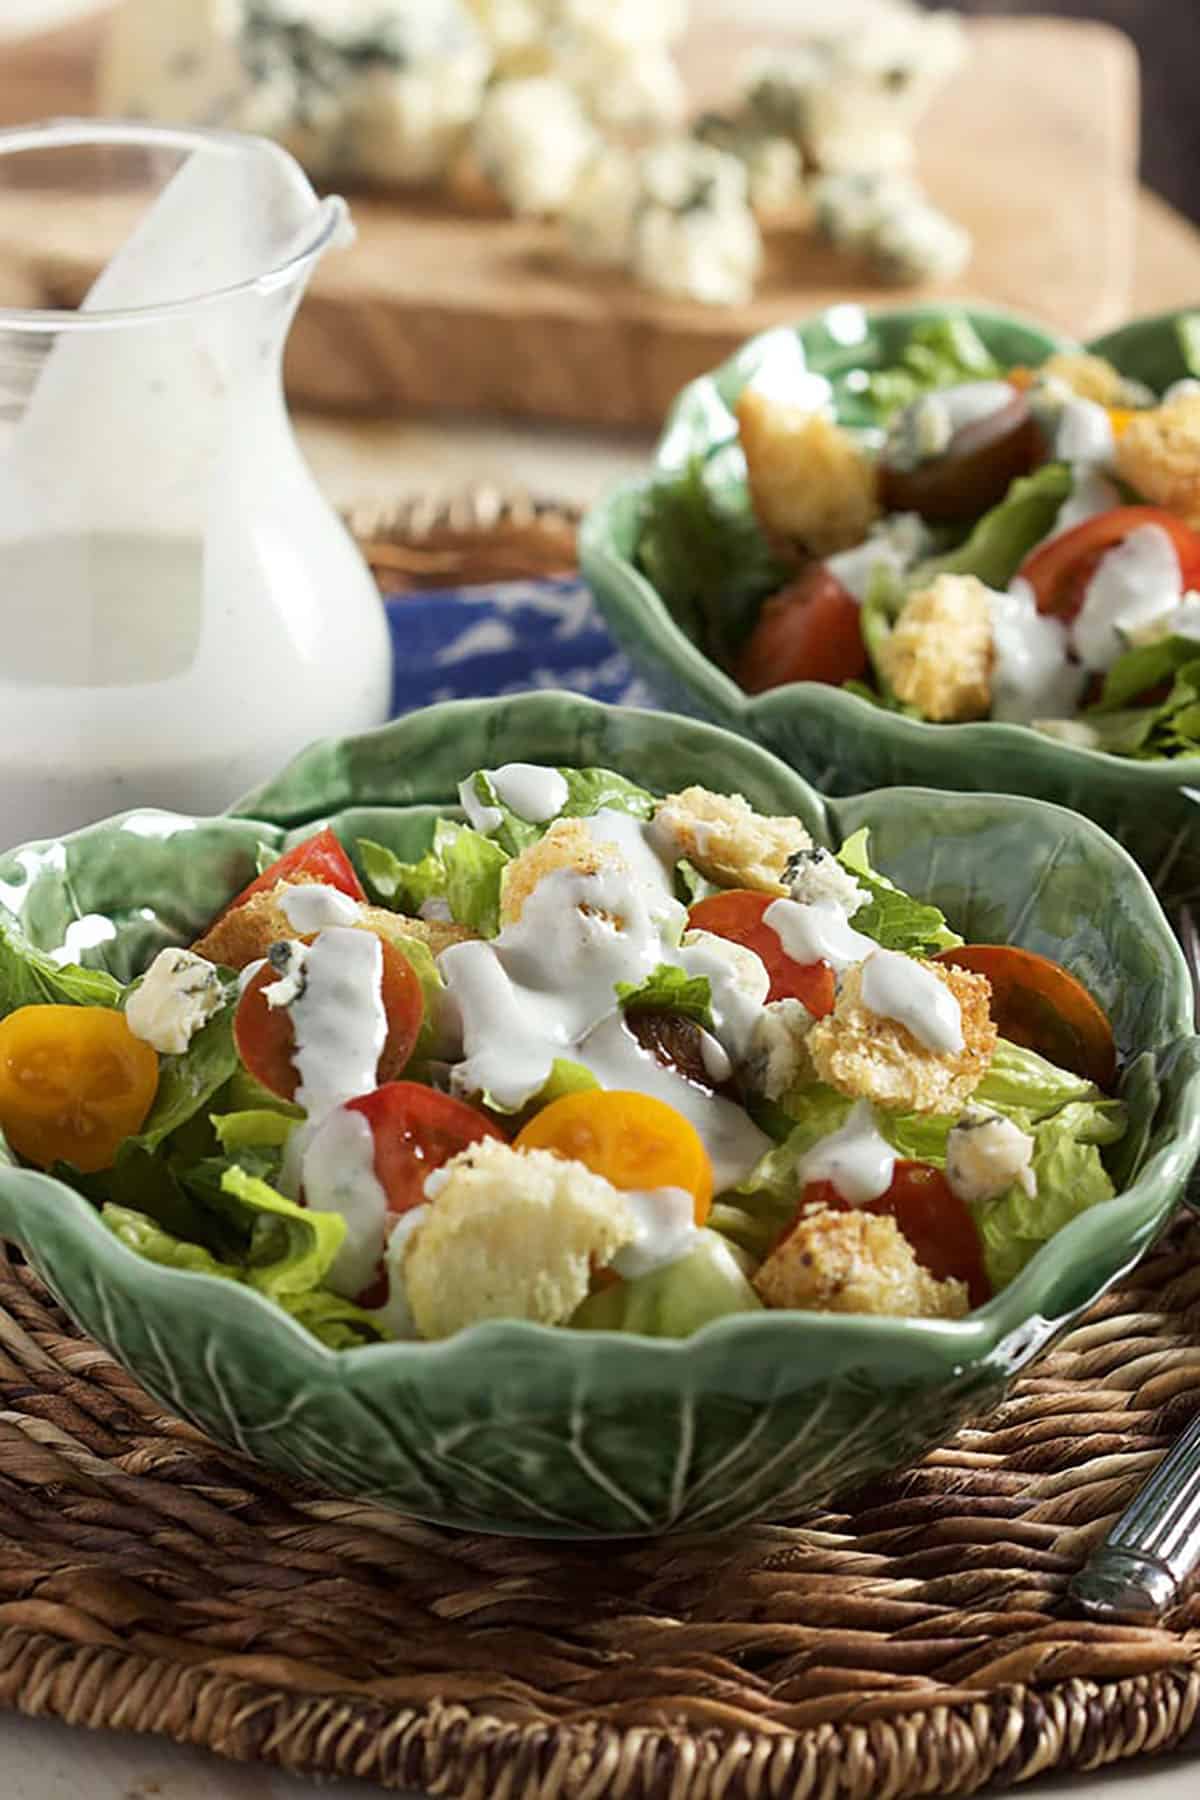 Salad dressed with Blue Cheese Dressing with a small glass pitcher of dressing in the background